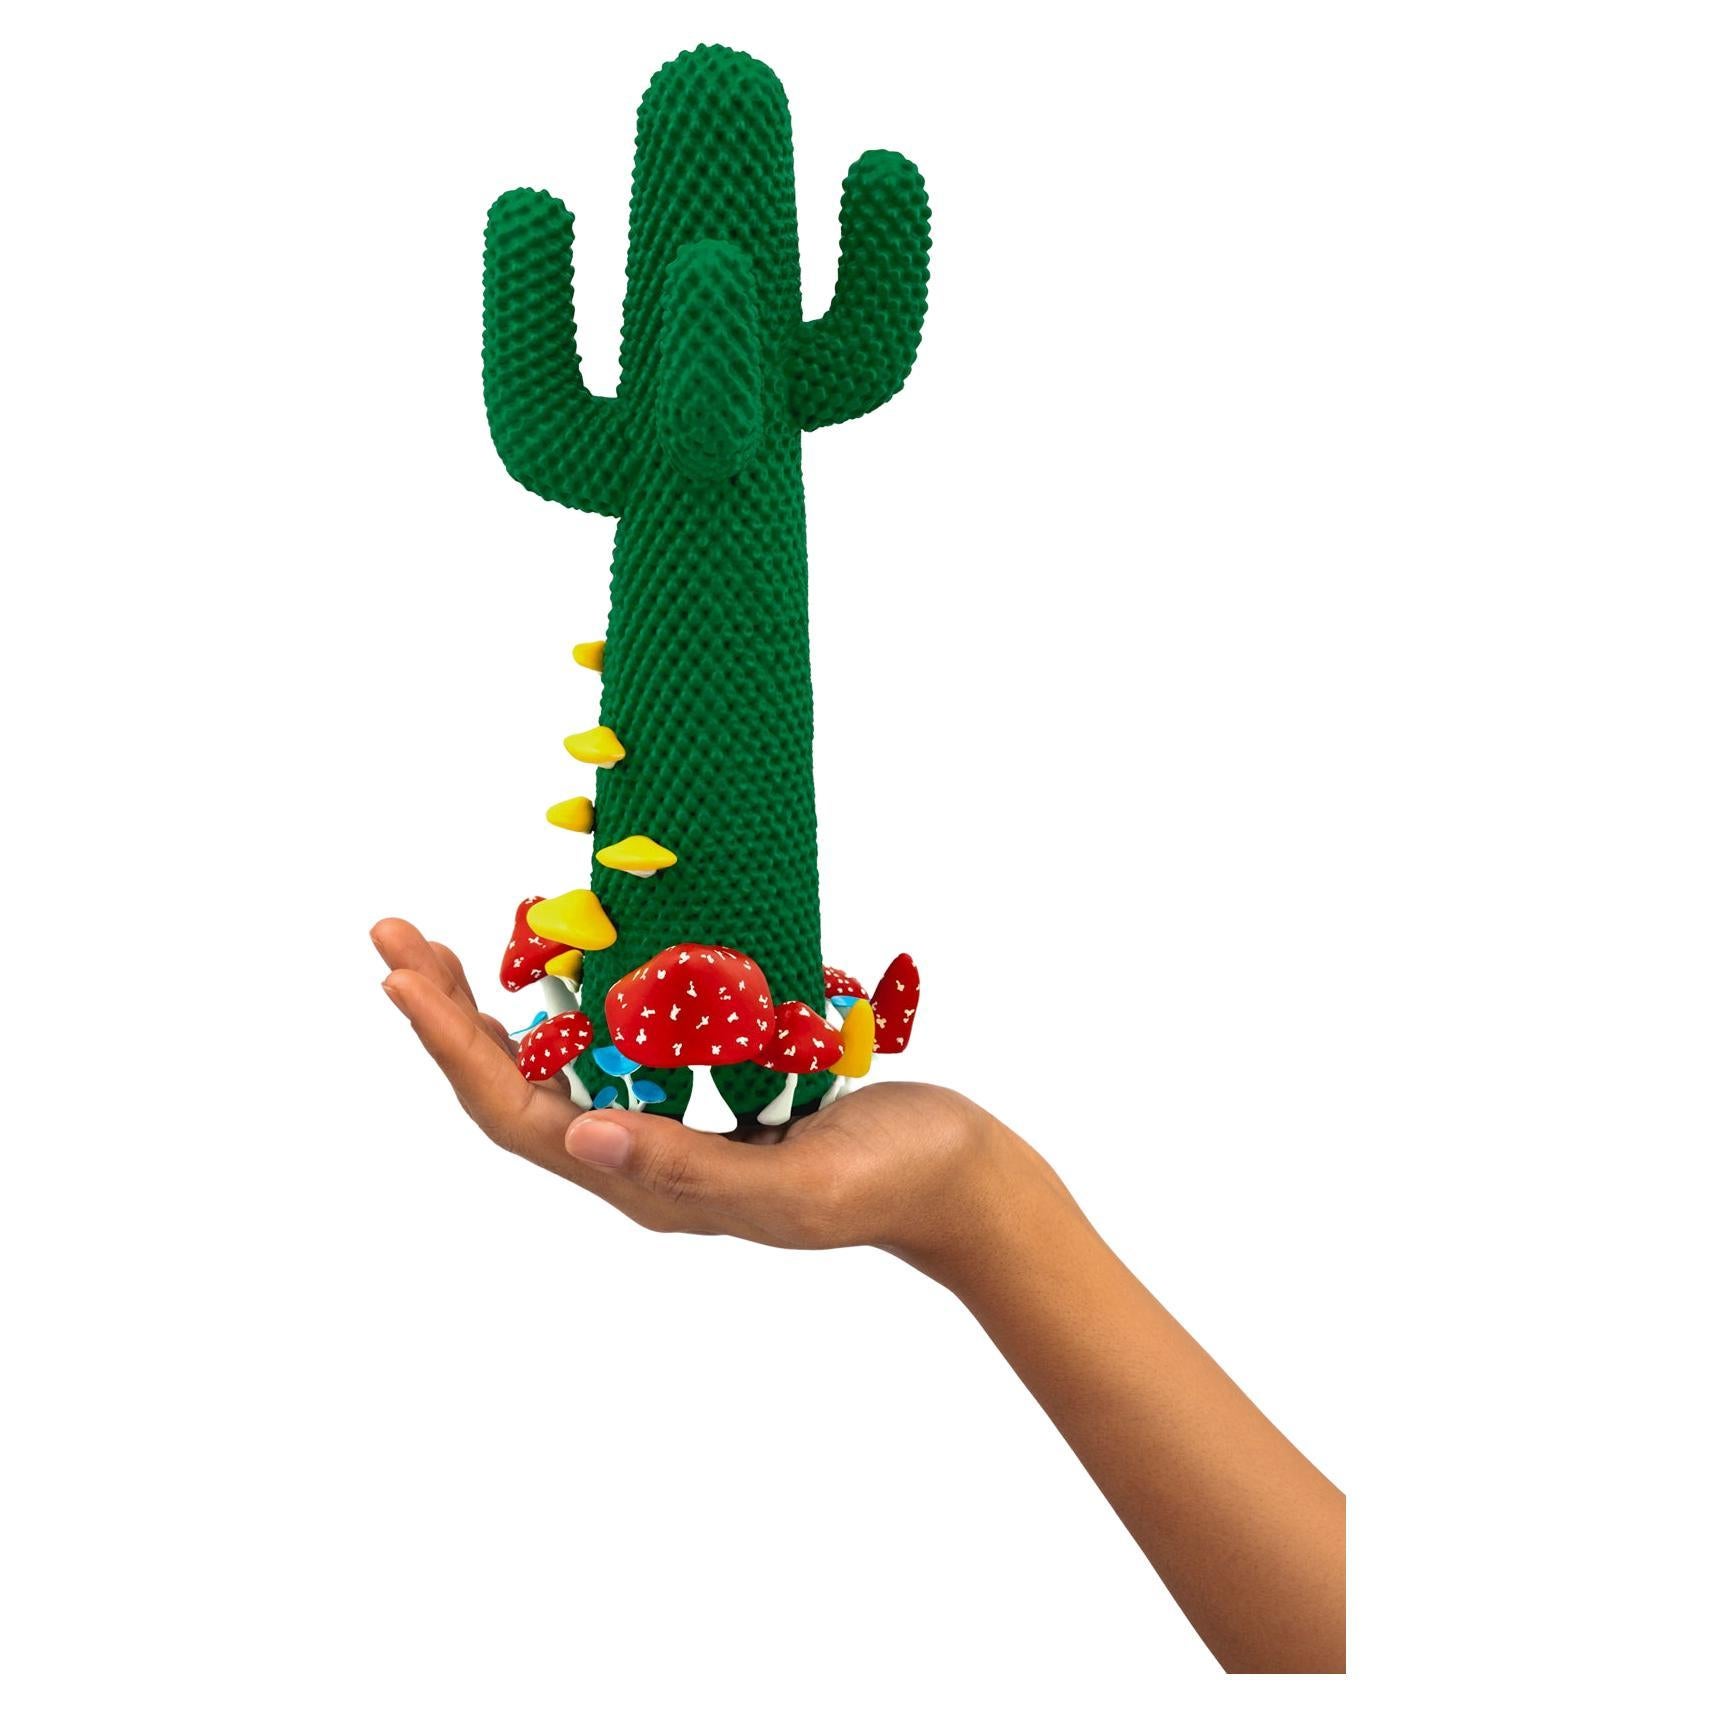 Limited Edition #40/99

Gufram presents the miniaturised version of the Shroom CACTUS® created in collaboration with A$AP Rocky and the artist’s new design studio HOMMEMADE Exactly as the real-size Shroom CACTUS®, the new Guframini piece features